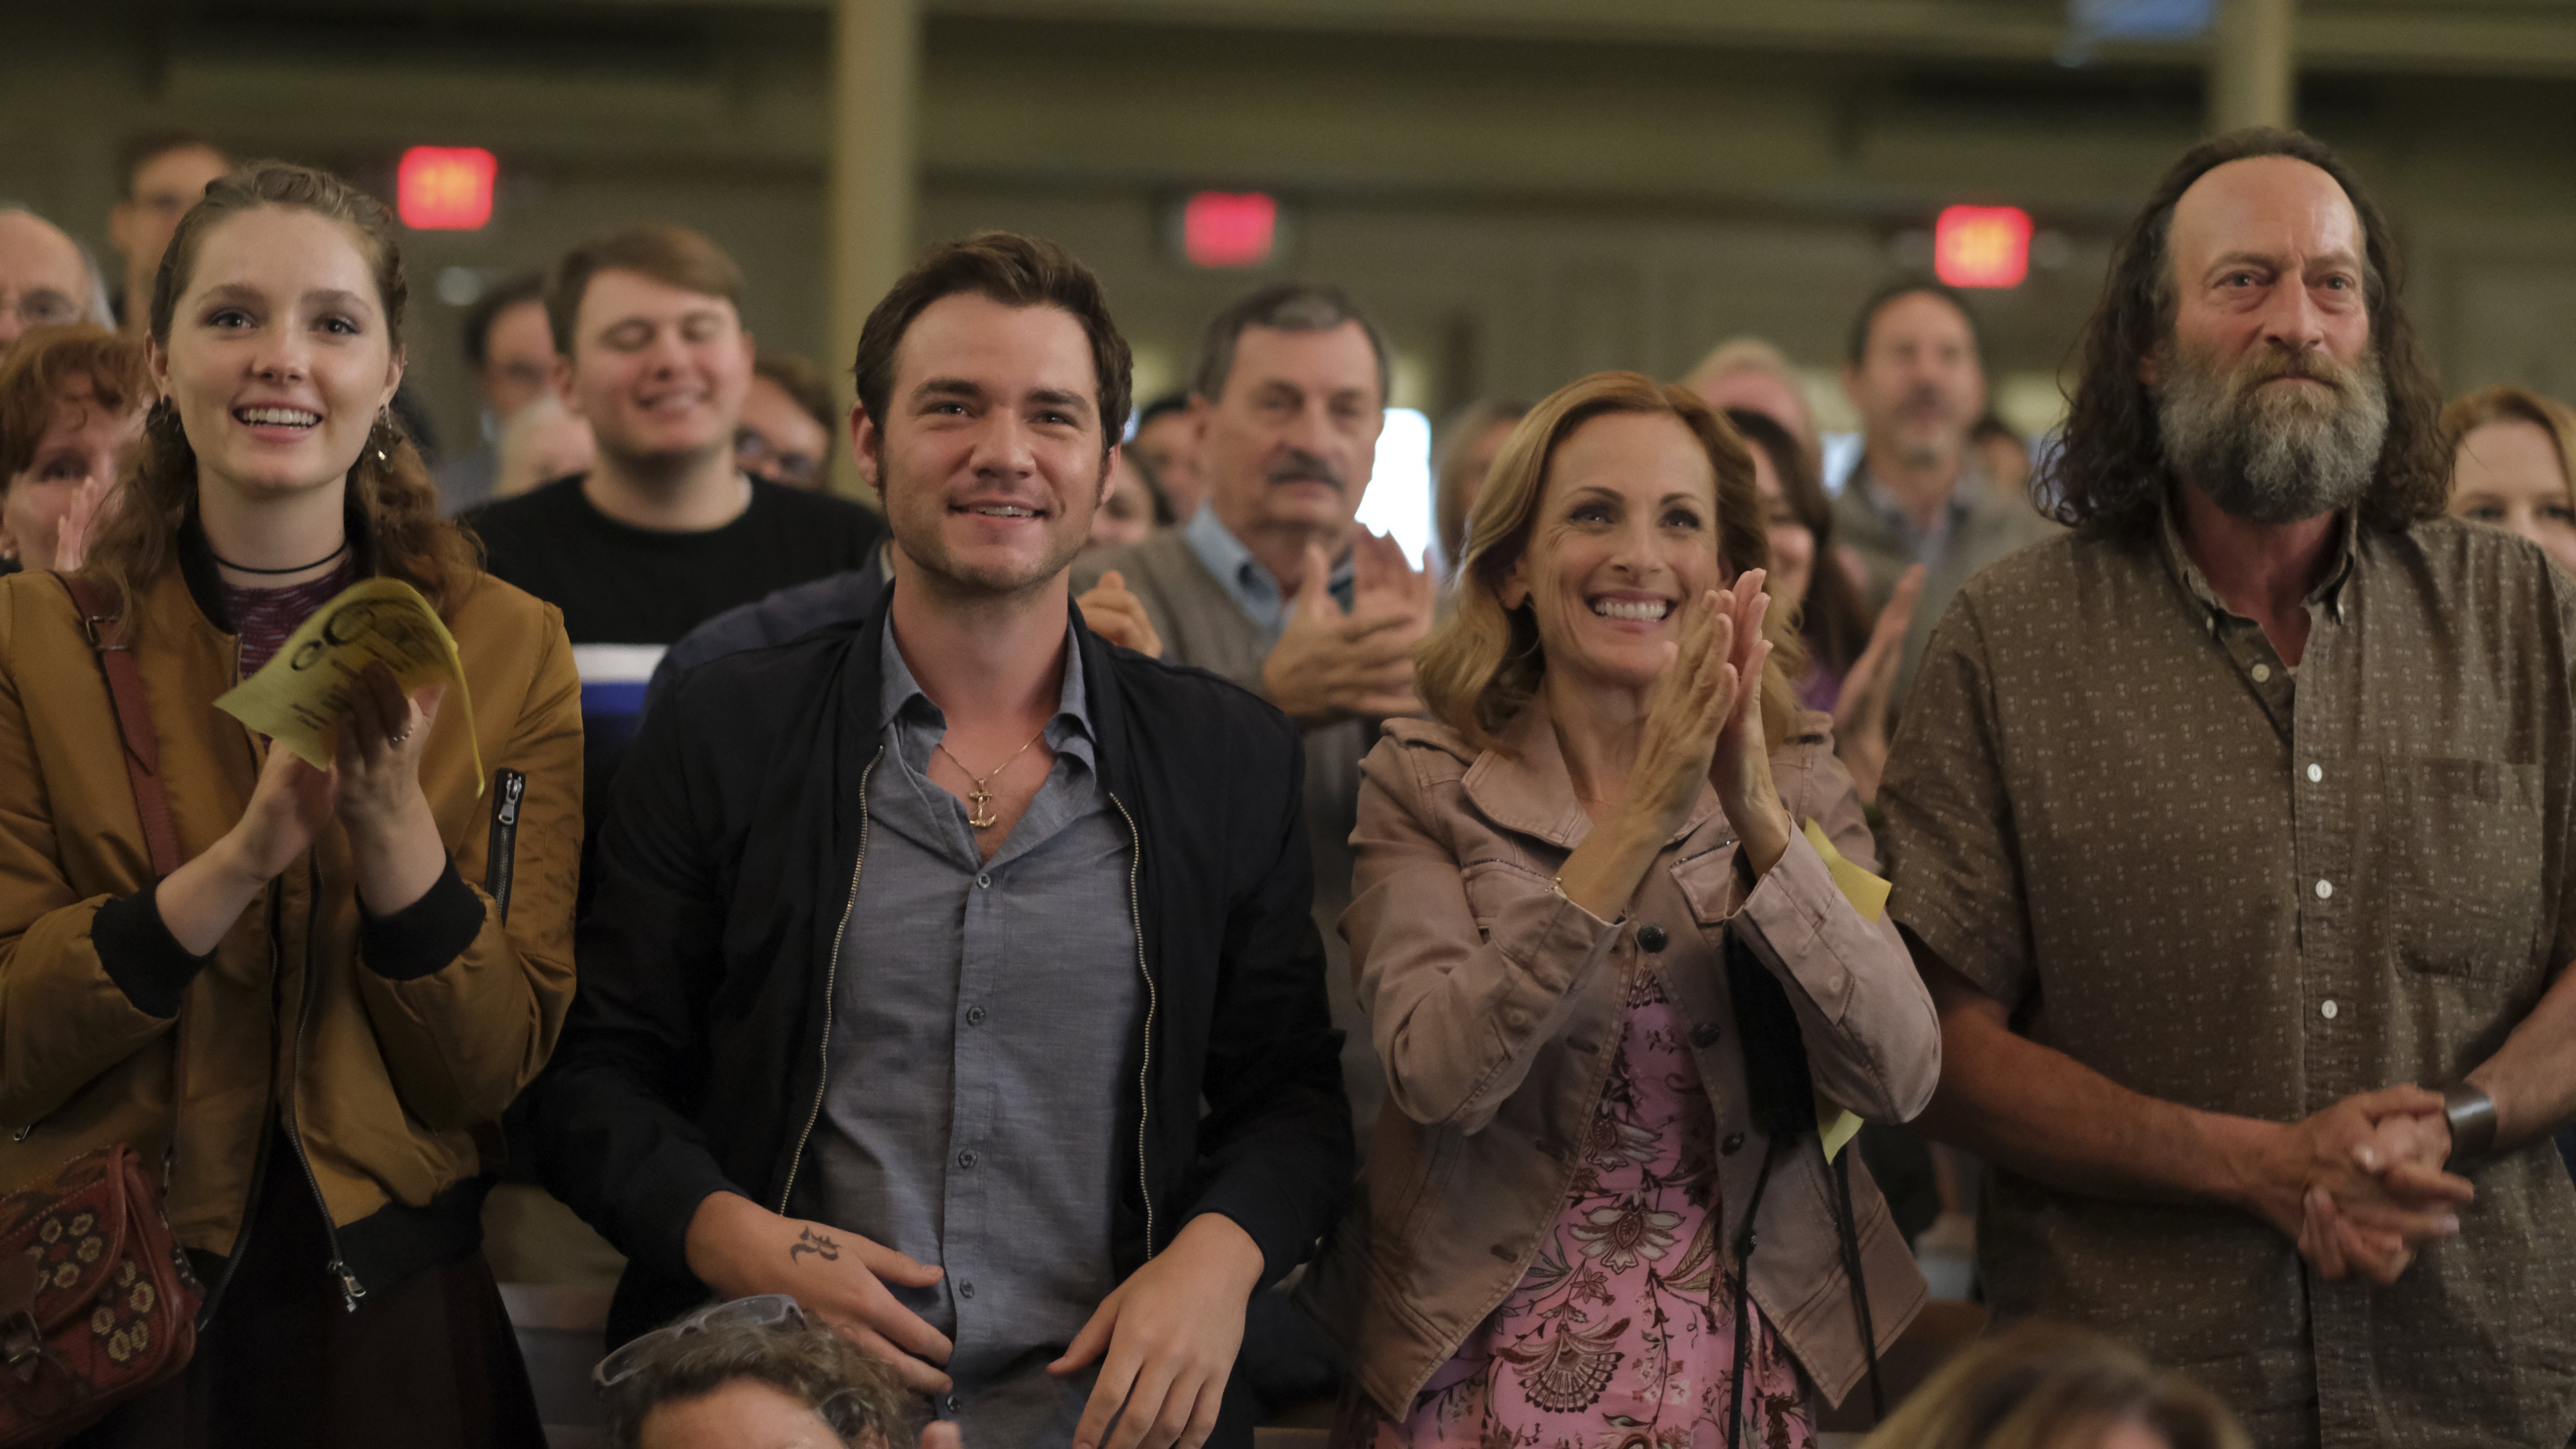 Marlee Matlin, second from right, plays the deaf mother of a hearing child in this family drama (Courtesy of Apple)